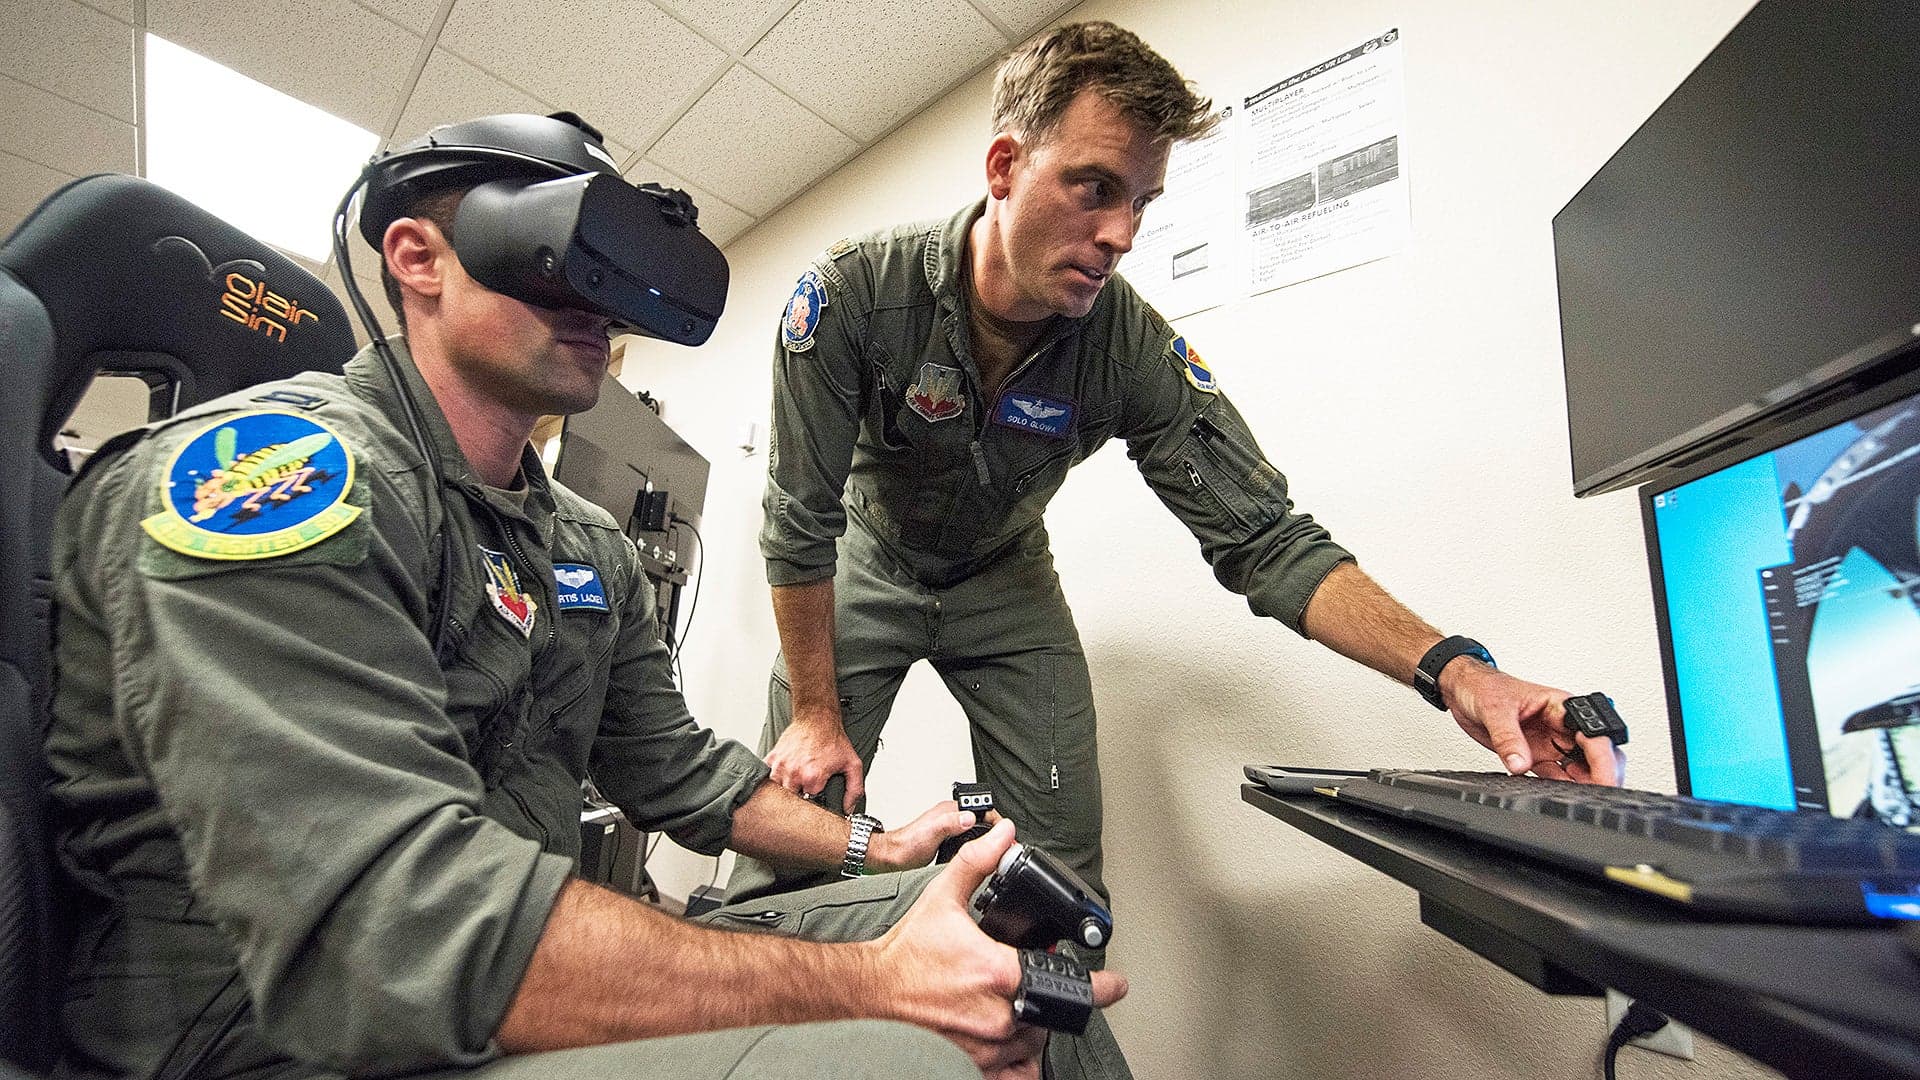 A-10 Warthog Pilots Are Using The Digital Combat Simulator Video Game To Train In VR